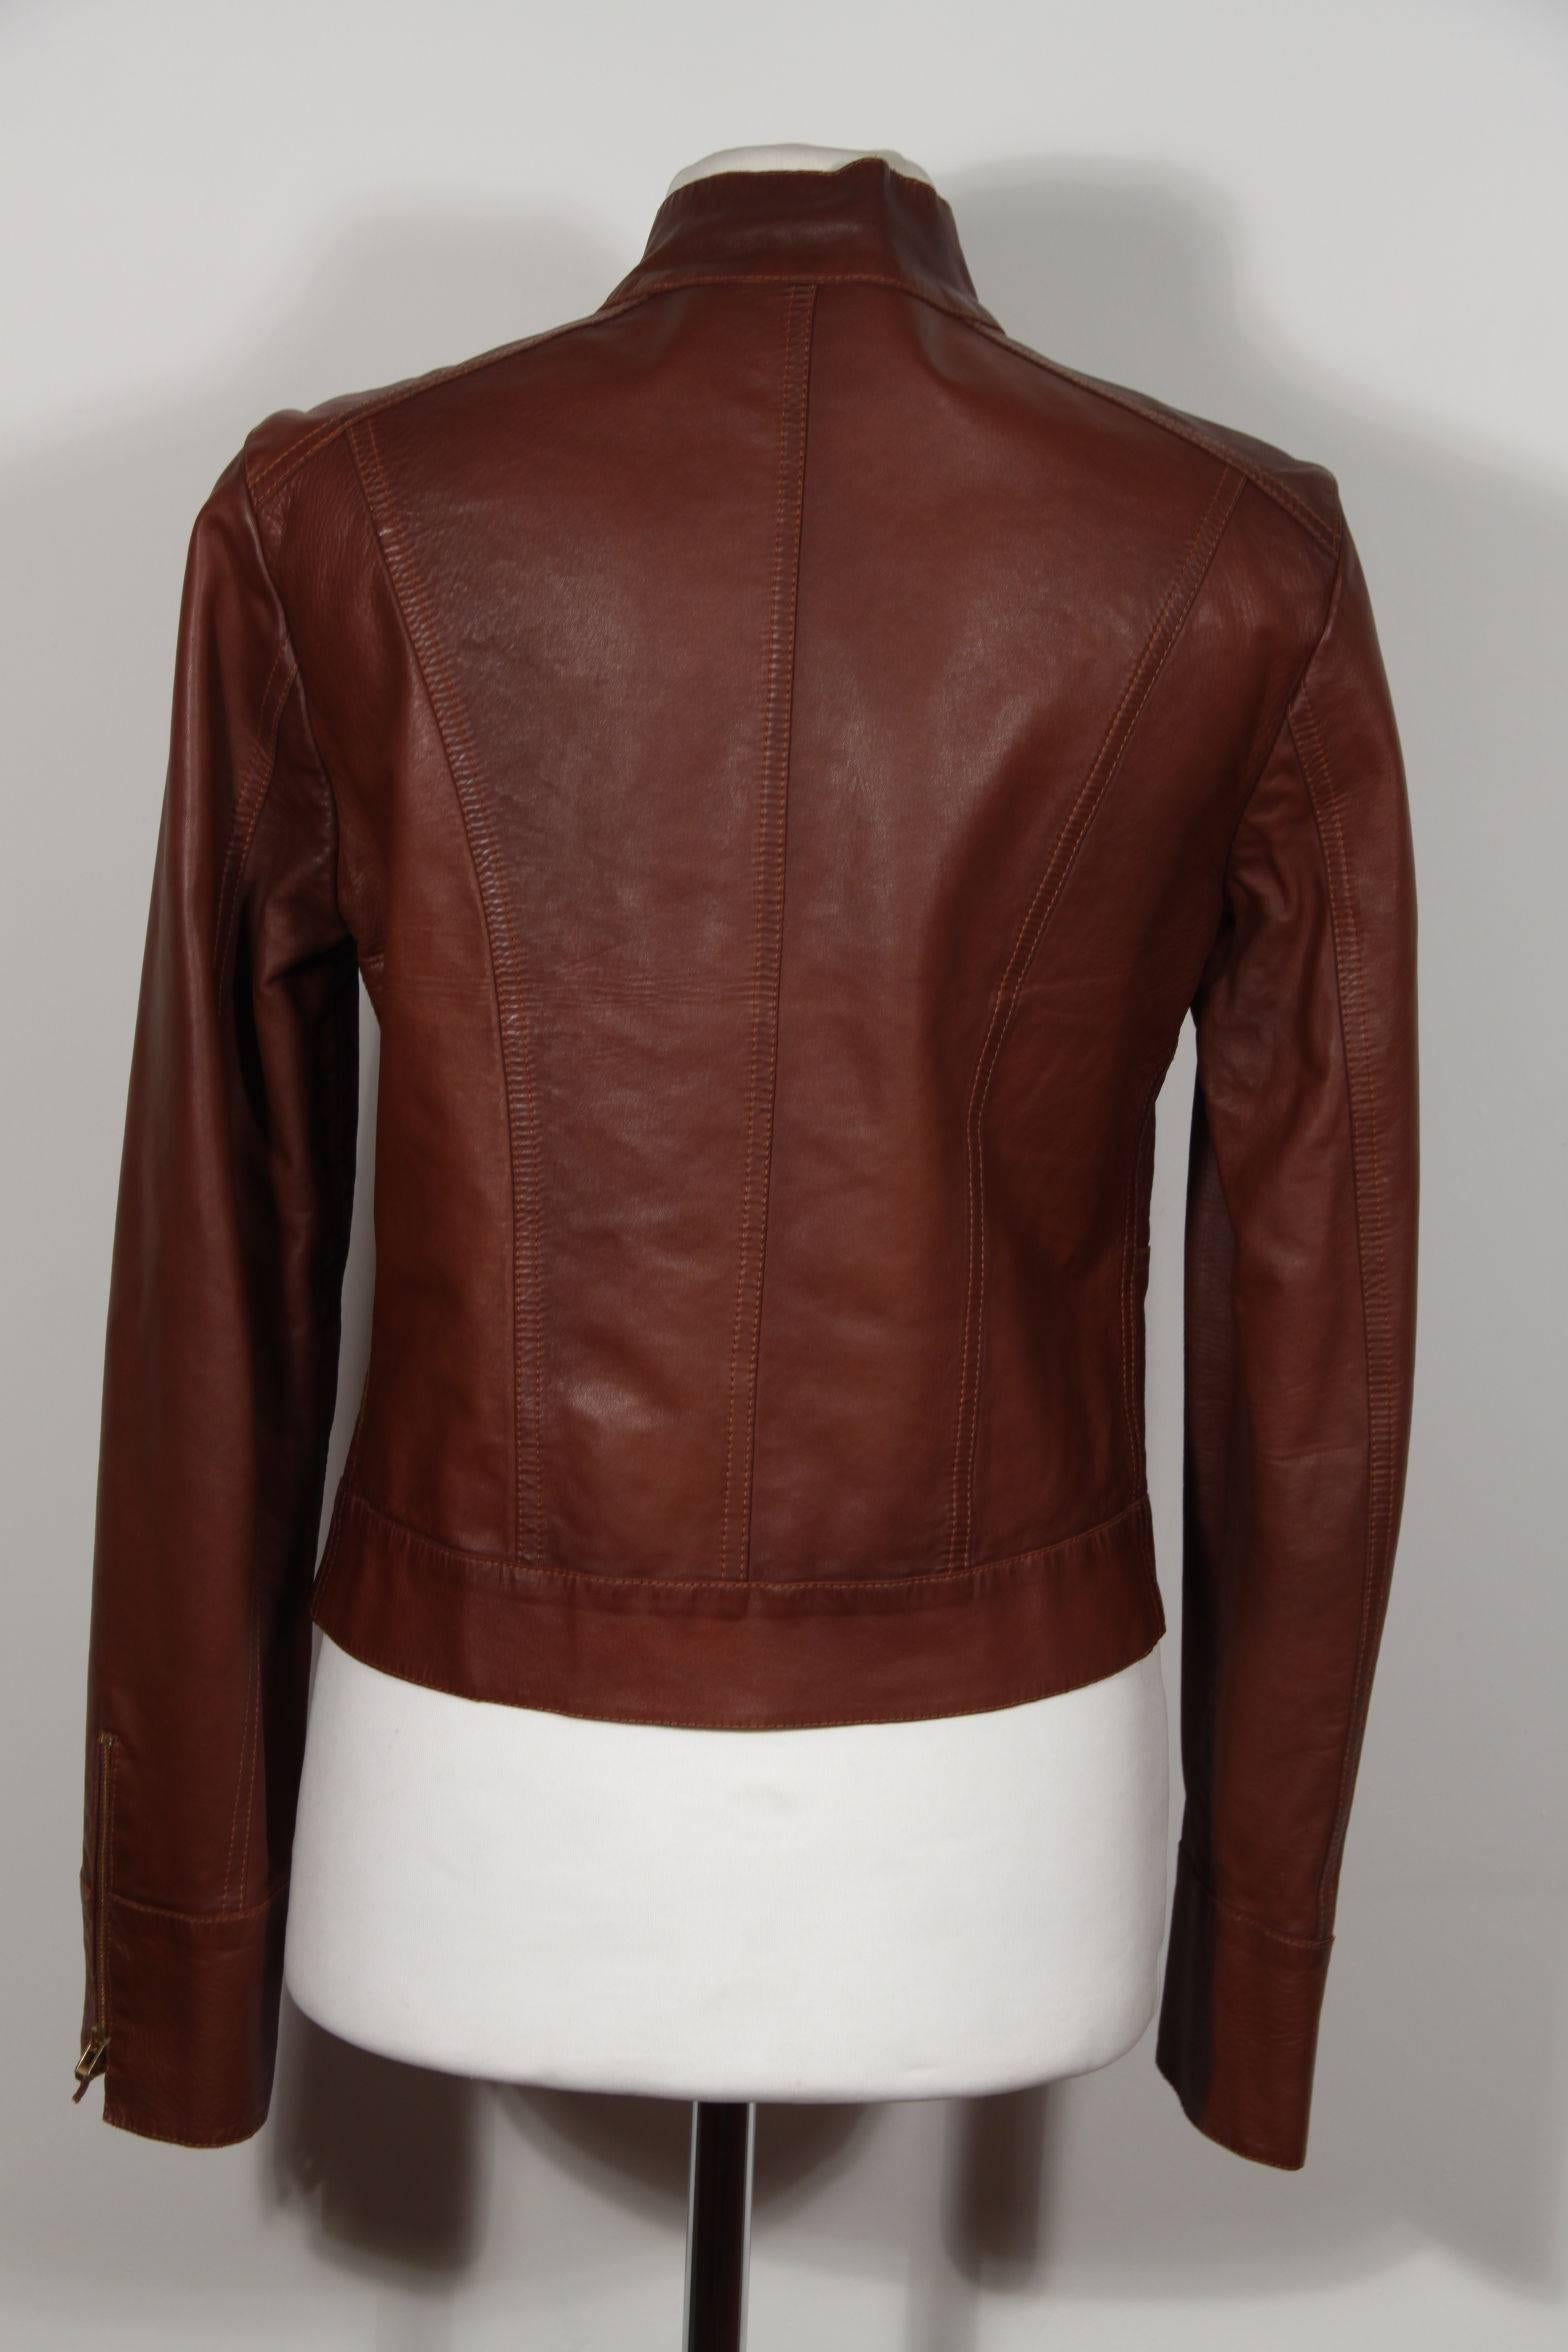 GUCCI TOM FORD Brown LEATHER Biker JACKET Zip Front Sz 40 3